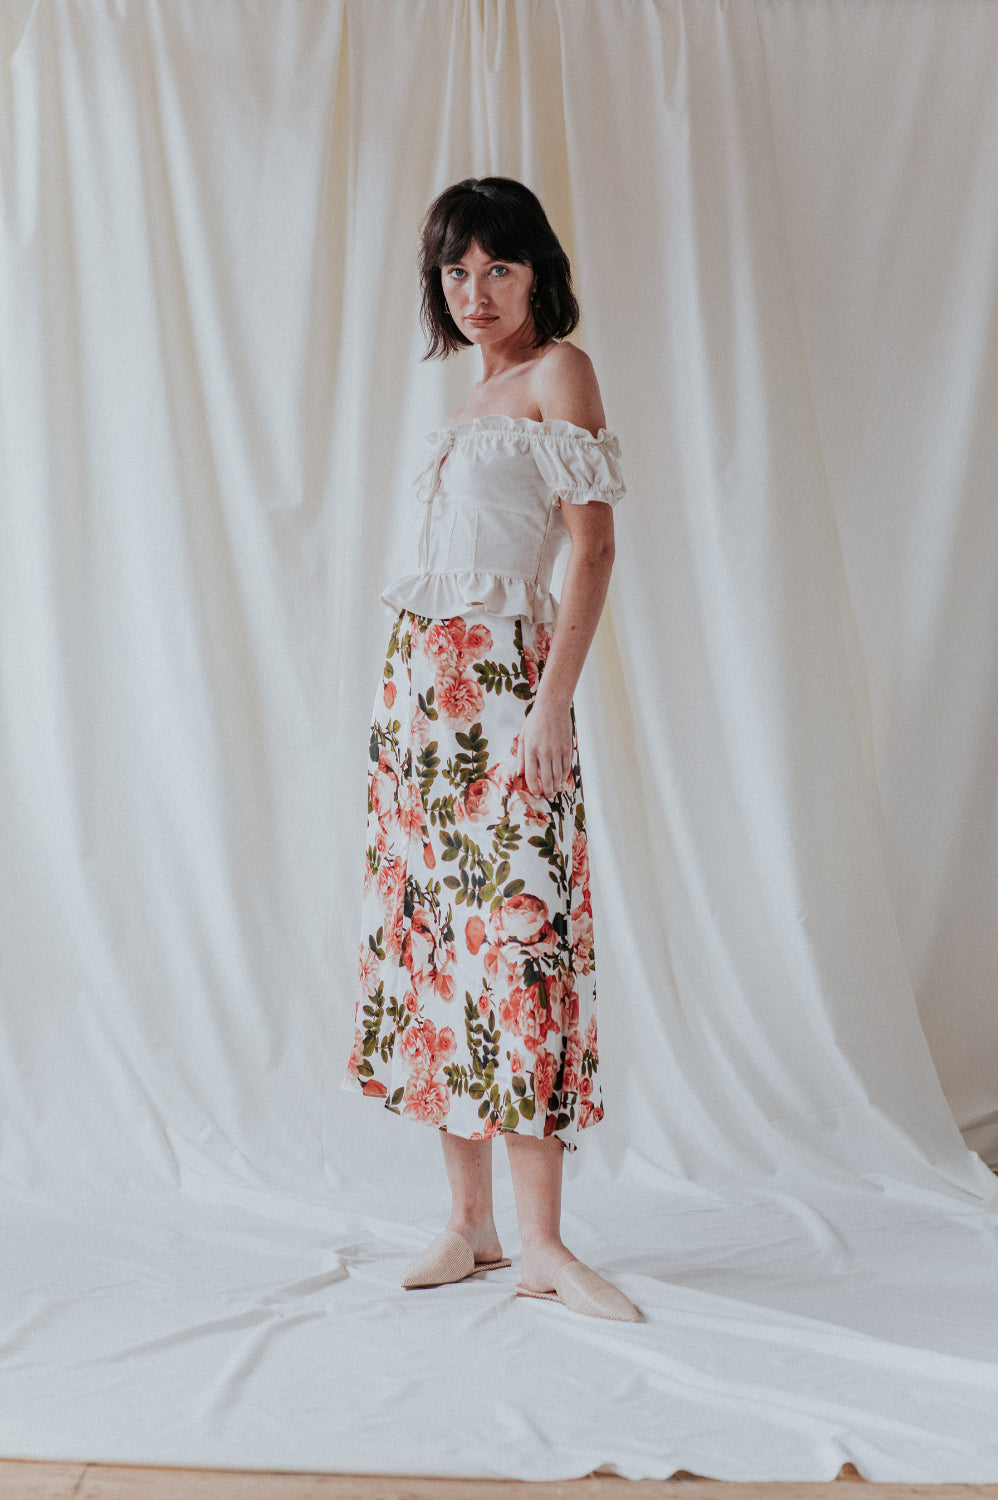 UNIQUE 21 Floral Midi Slip Skirt With Side Slits Modest Below The Knee Skirt Flowy Hem with Pink Flowers Design